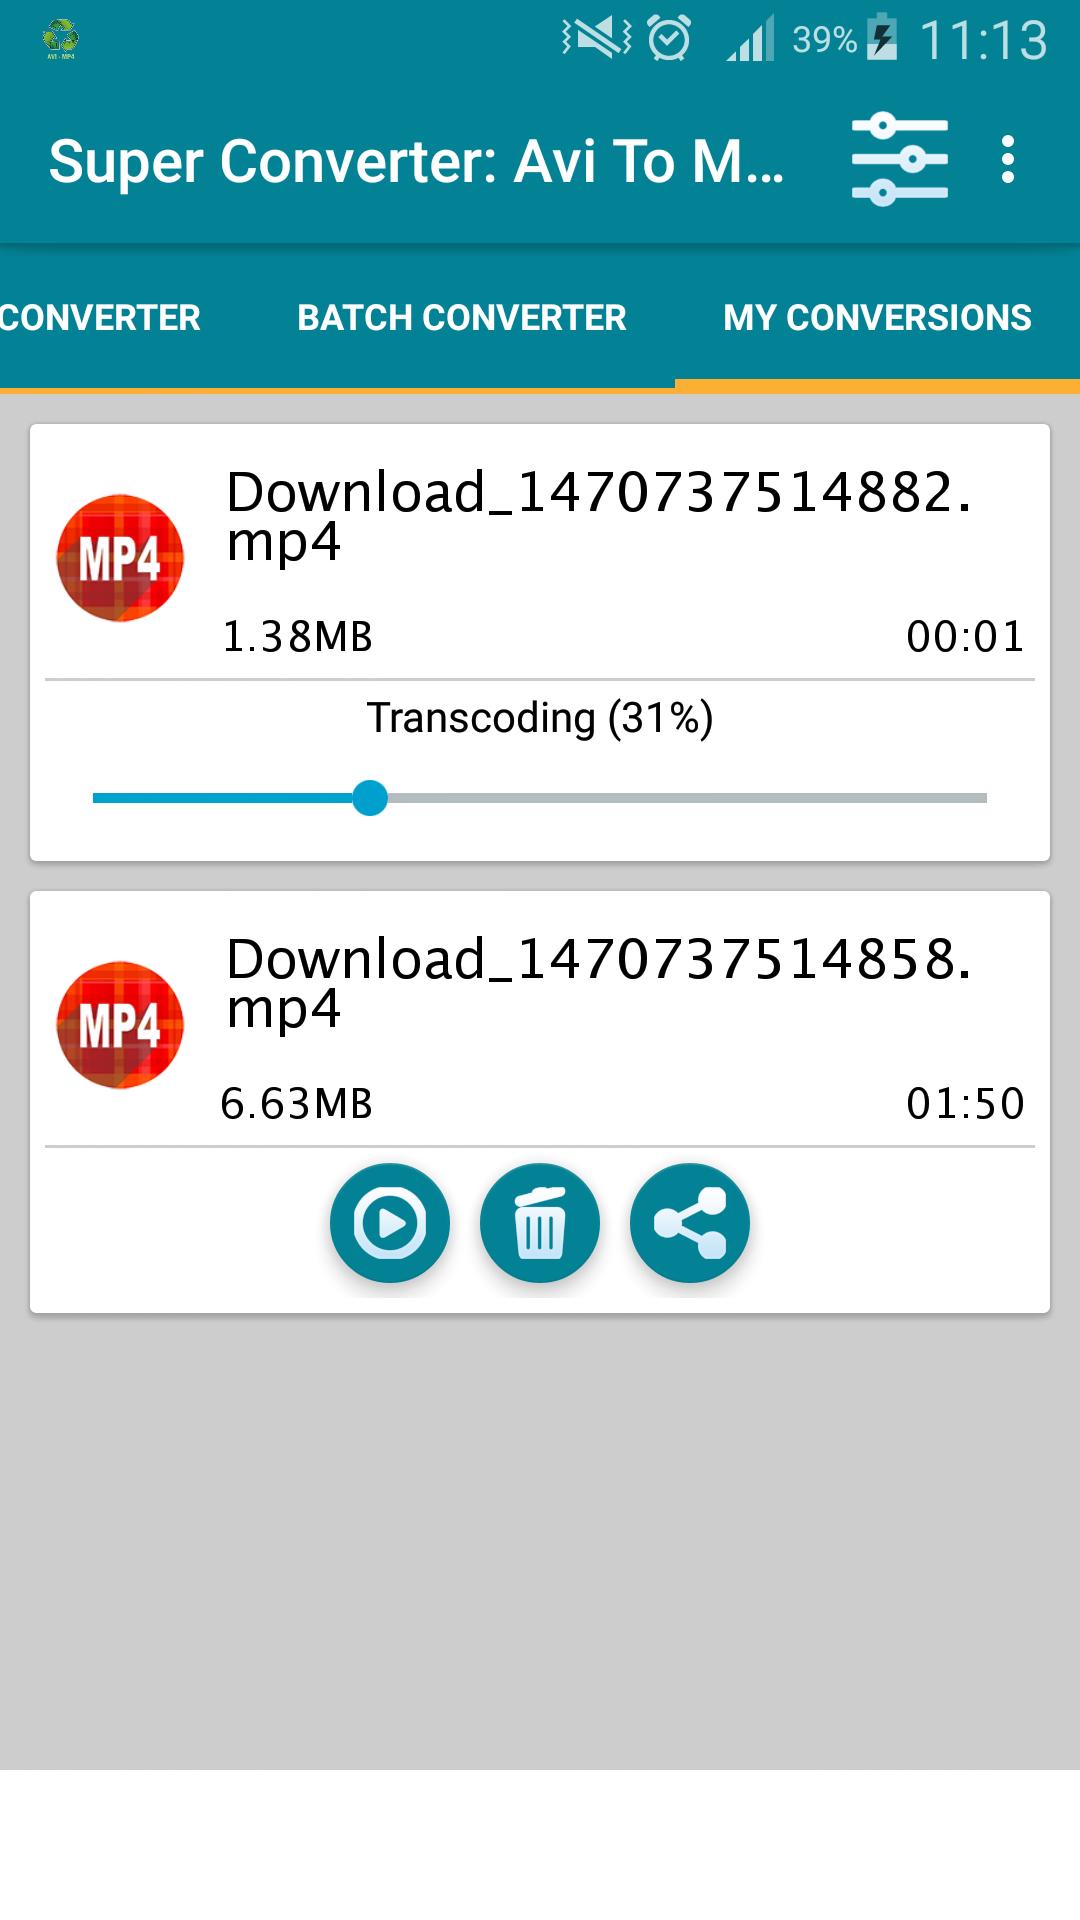 Super Converter : AVI To MP4 for Android - APK Download